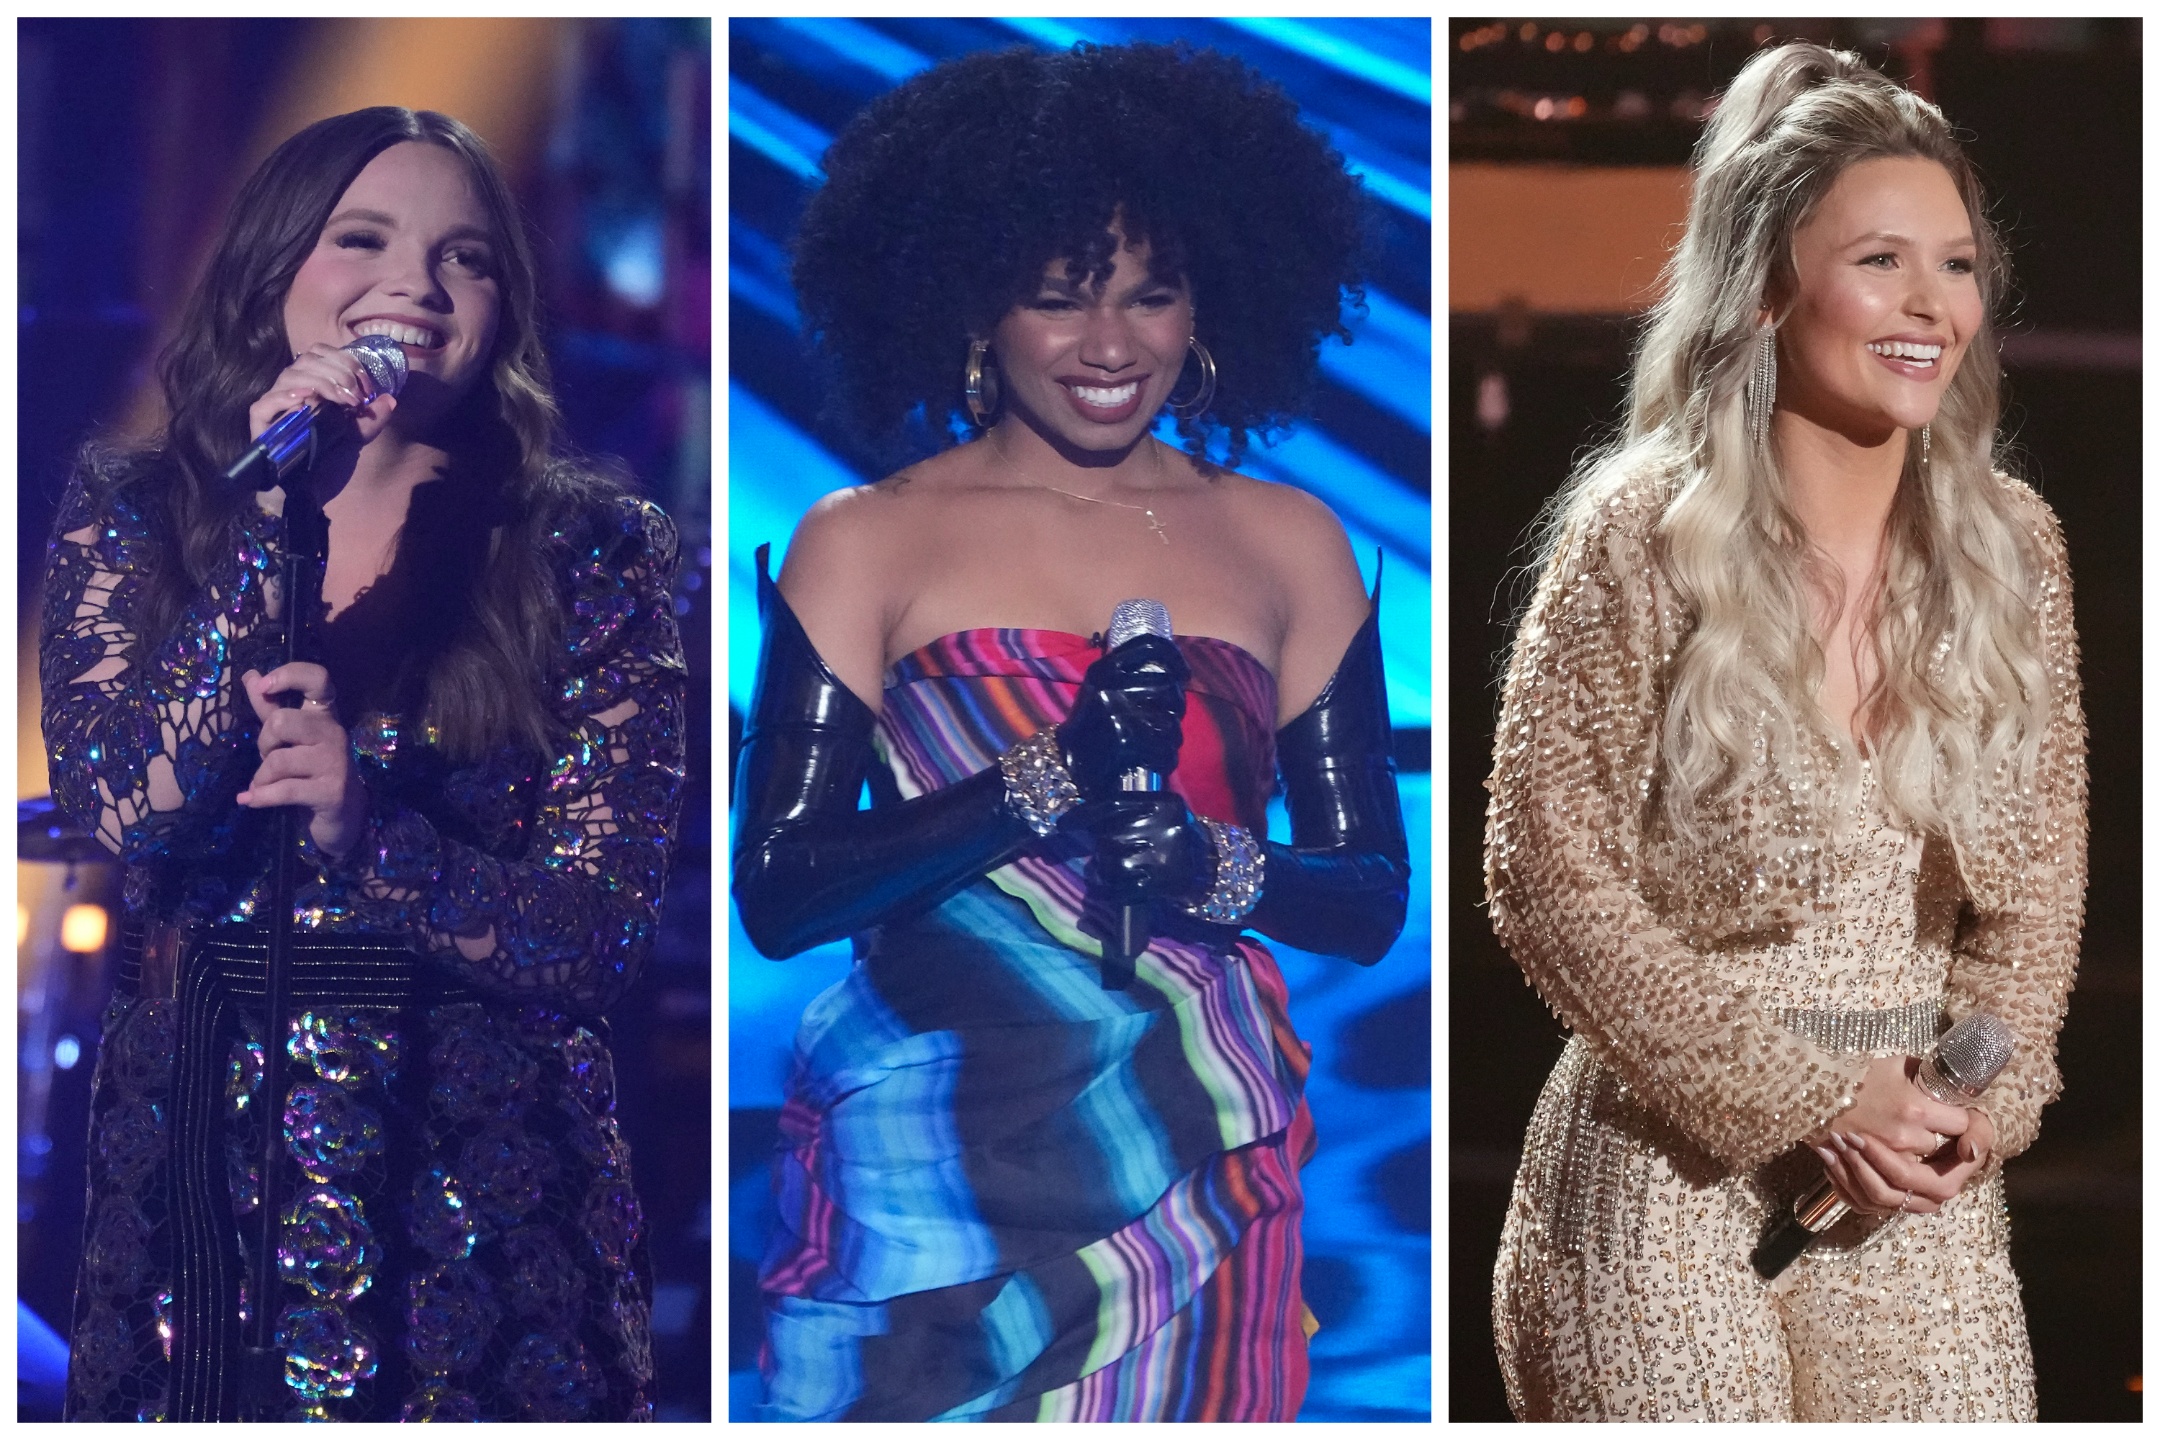 3 Past ‘Voice’ Finalists Make ‘American Idol’ Top 10